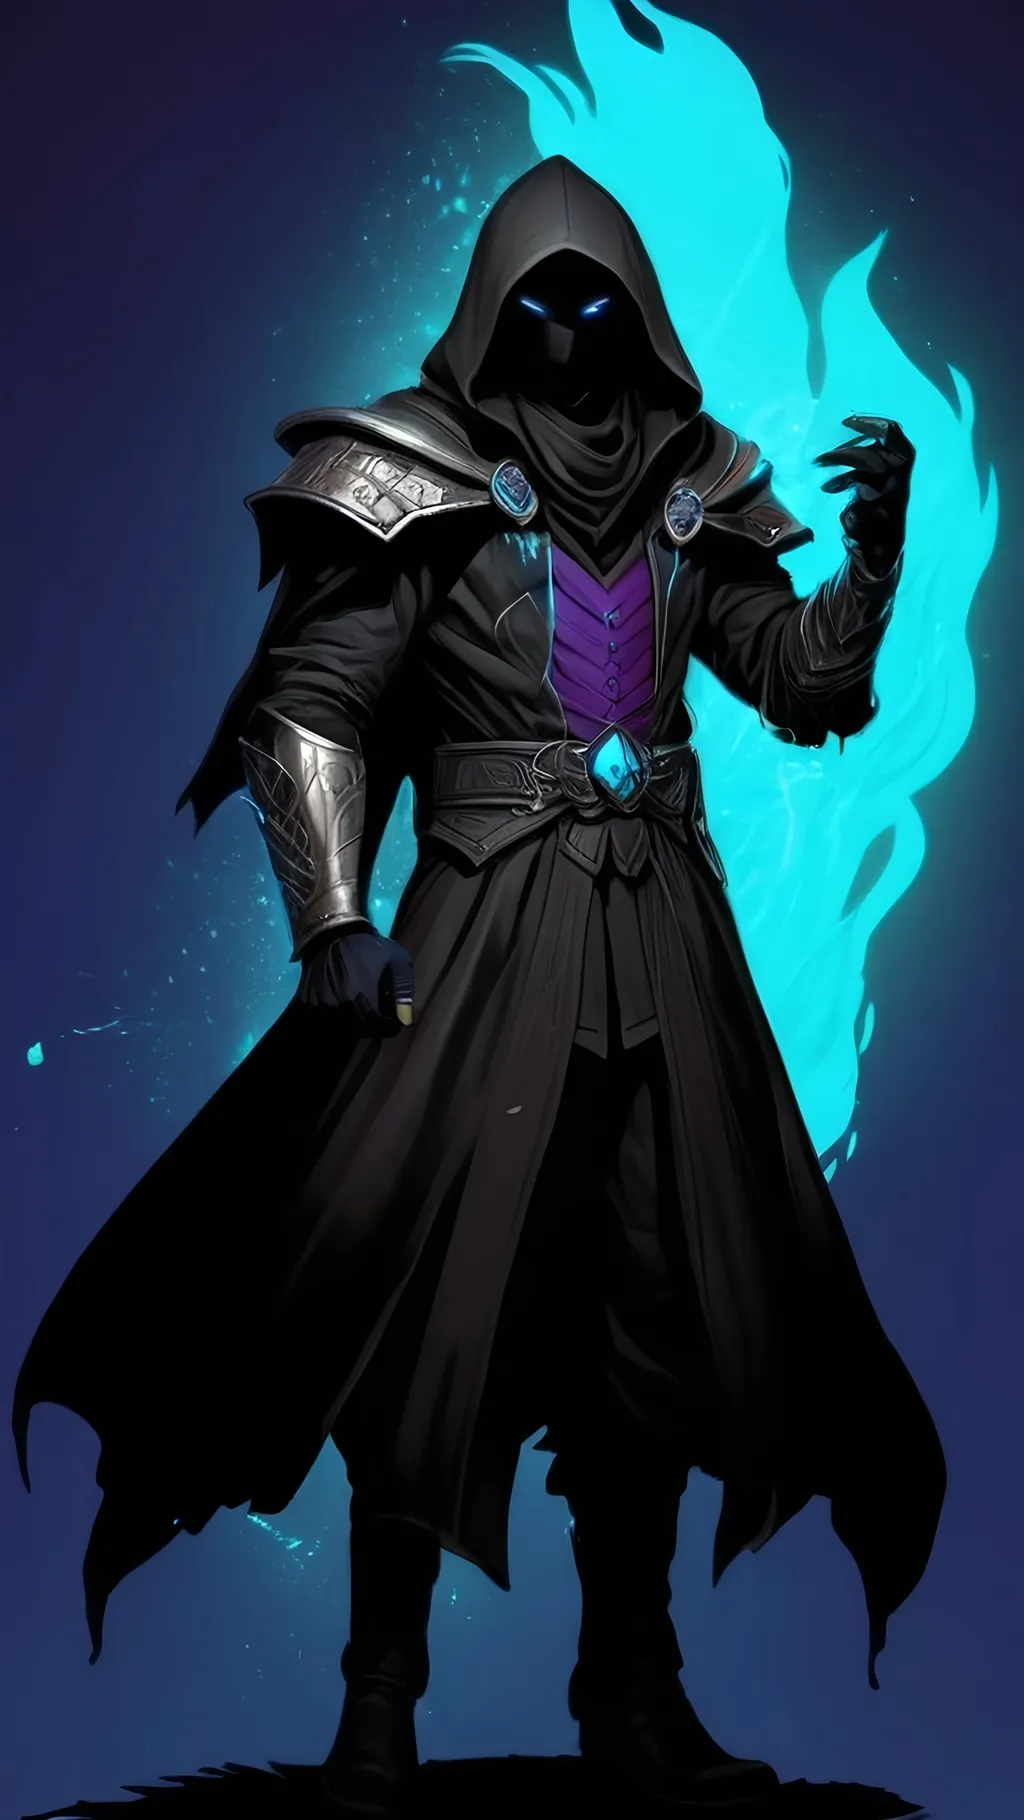 Prompt: A former drow slave turned shadow sorcerer. The young boy has obsidian black skin and marble white hair. He wears a tattered black cloak, leather armor and a hood to cover his face. His power manifests as liquid purple and cyan flames that hover around him. The shadows around him shift and change showing anger despite his emotionless face. Vector Style, Color Enhance, High contrast